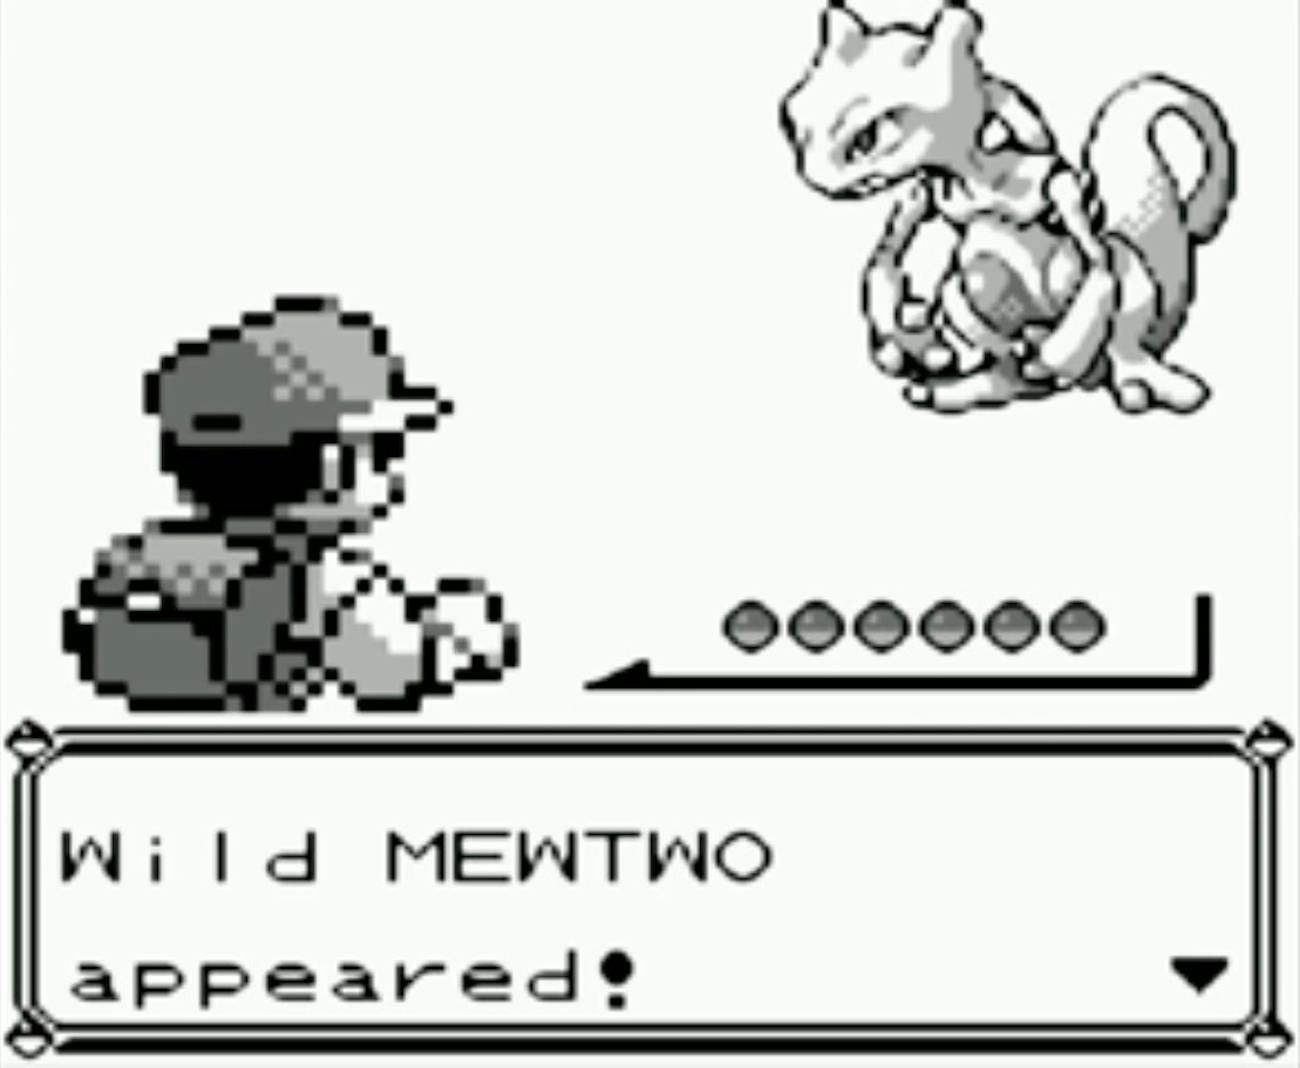 mewtwo-in-pokmon-red-and-blue.jpeg?auto=format%2Ccompress&dpr=2&w=650